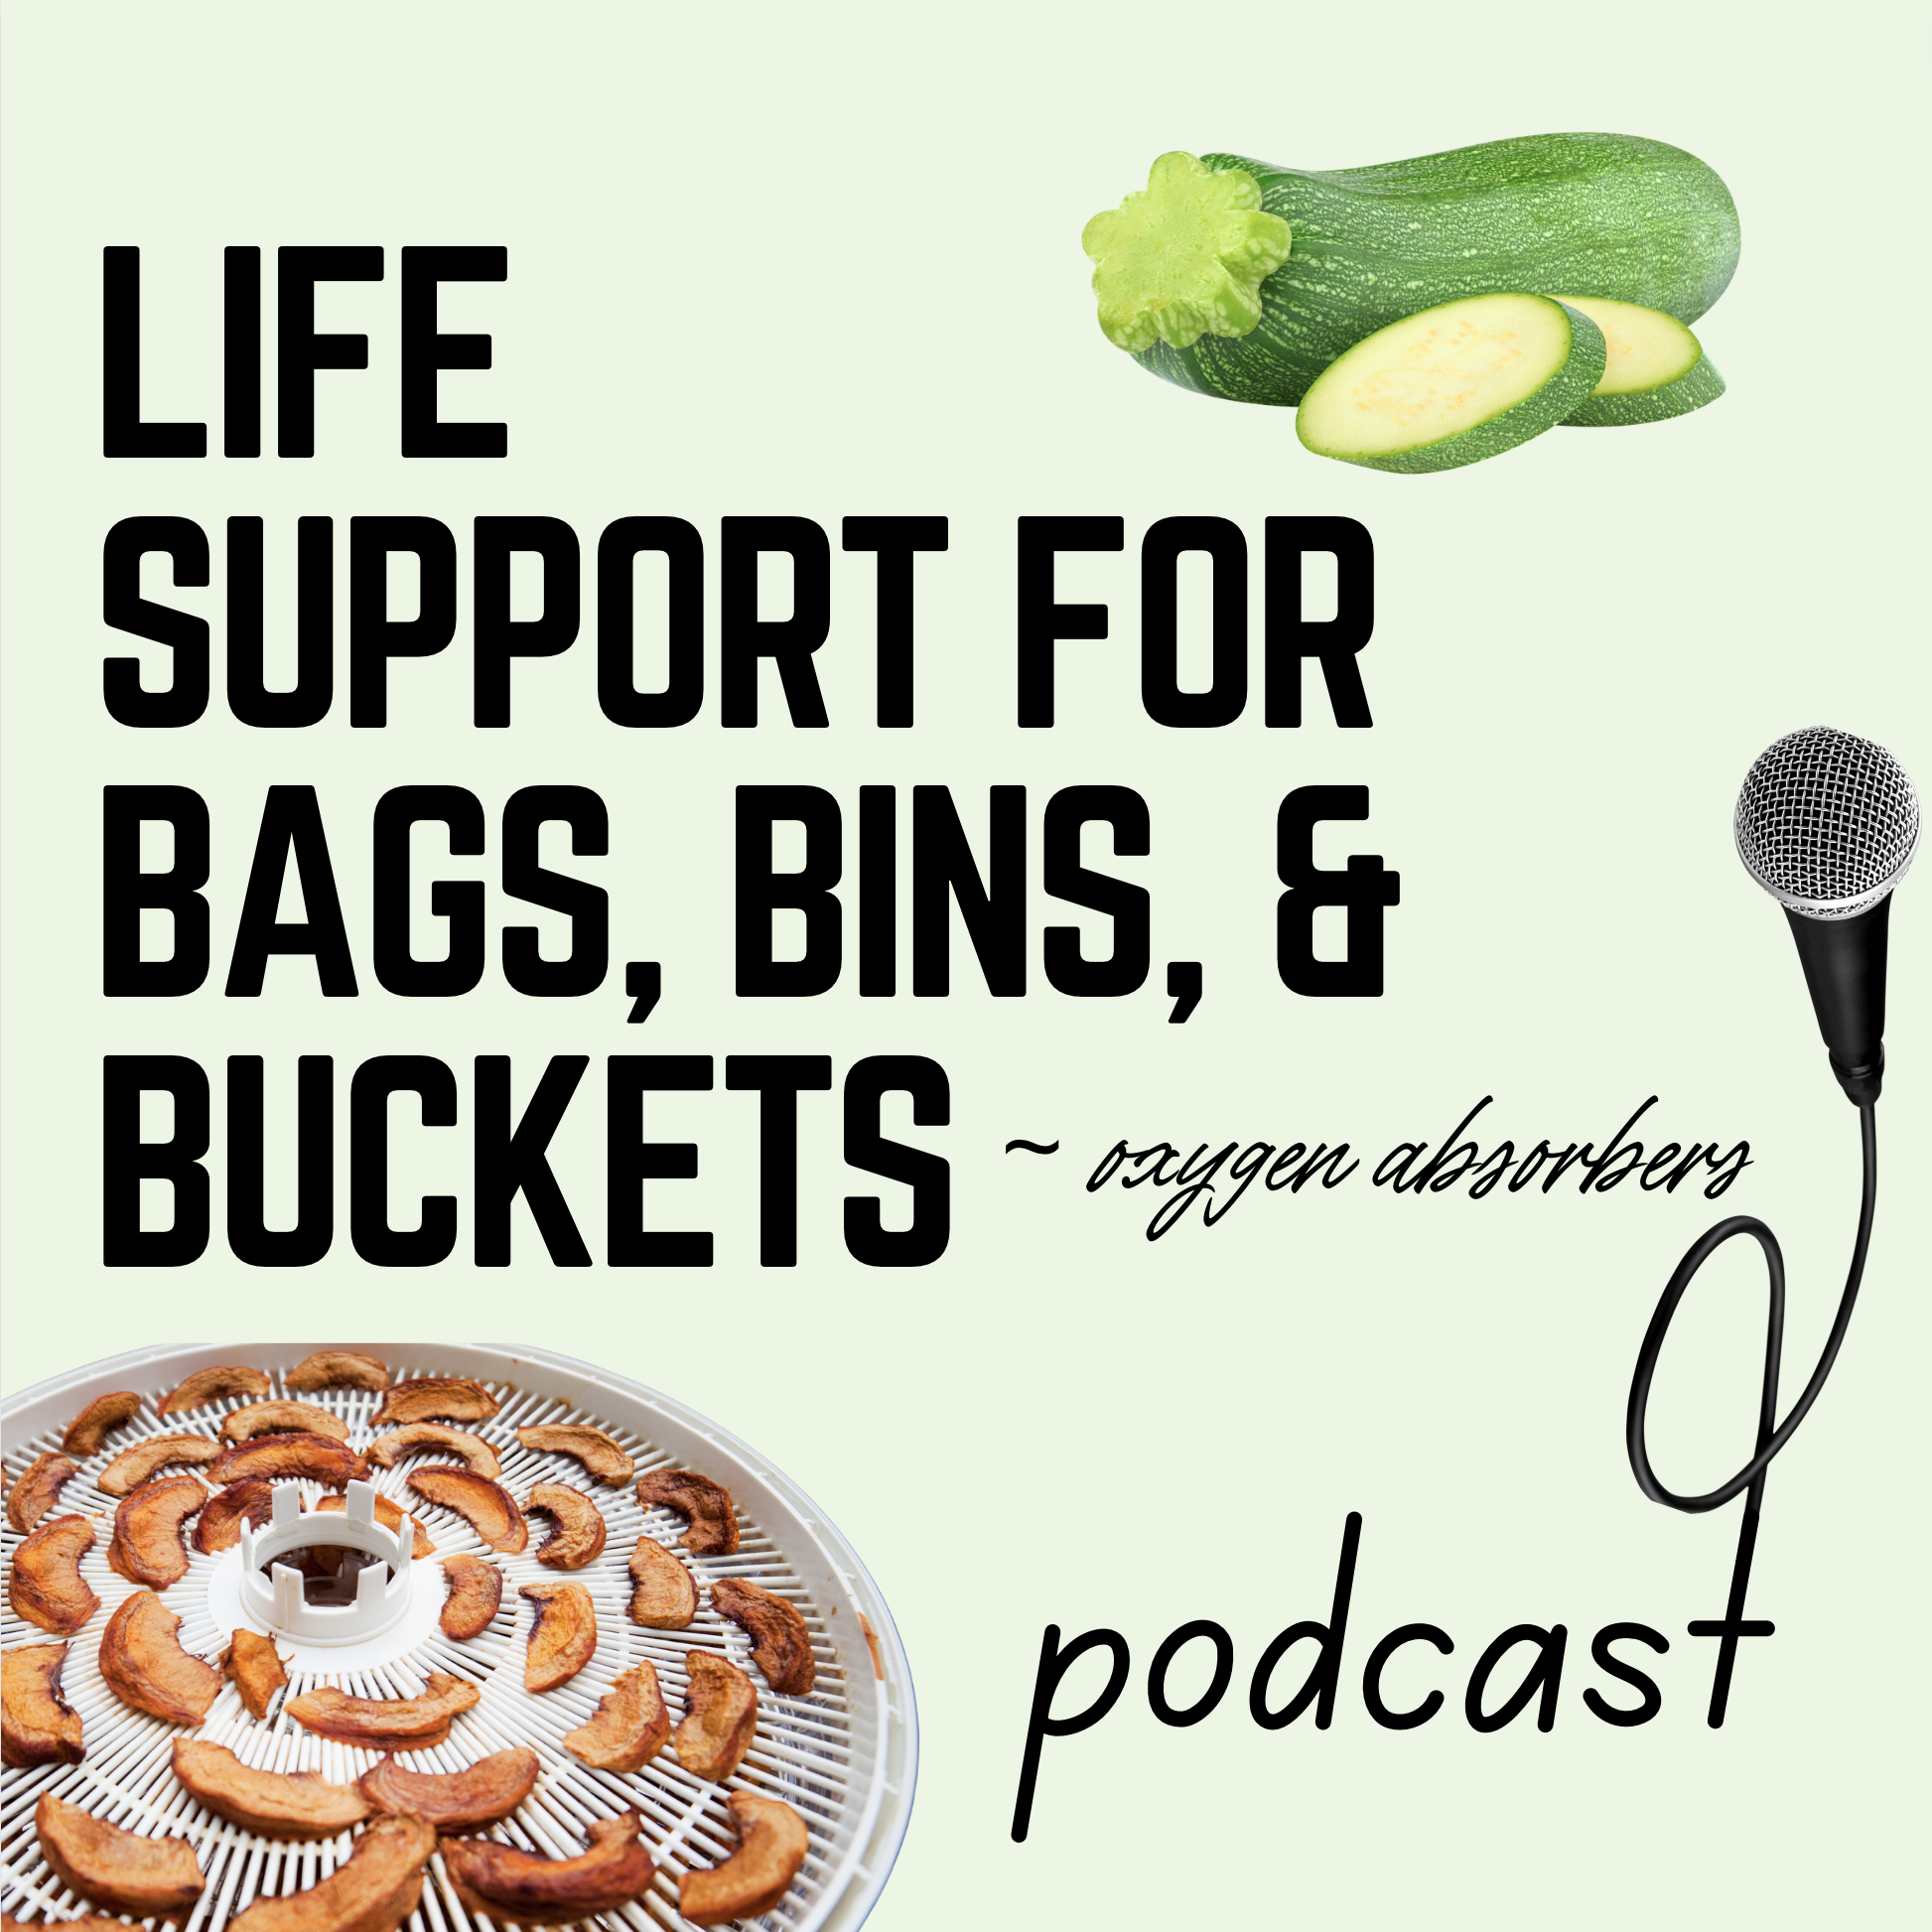 Oxygen Absorbers: Life Support for Bags, Bins & Buckets podcast episode 3